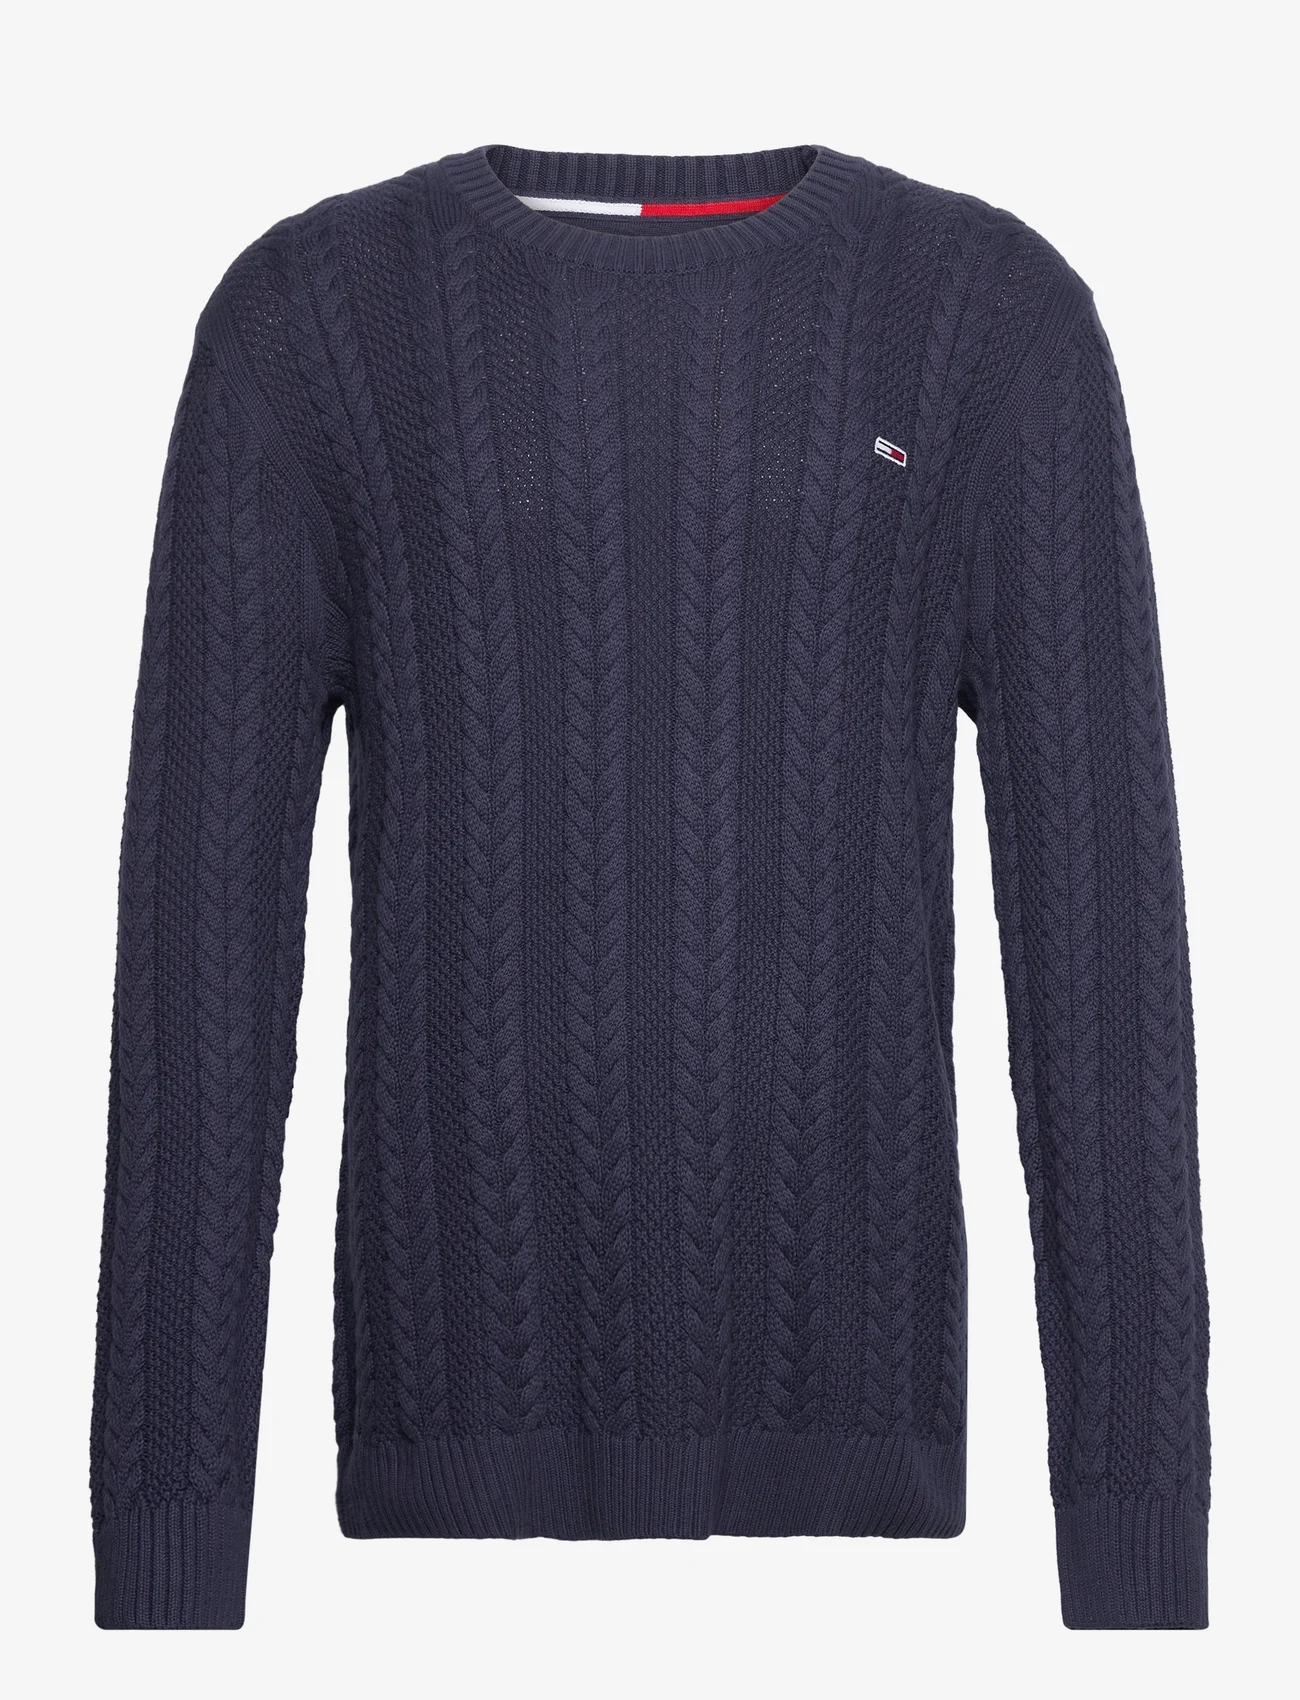 Tommy Jeans - TJM REG CABLE SWEATER - rund hals - twilight navy - 0